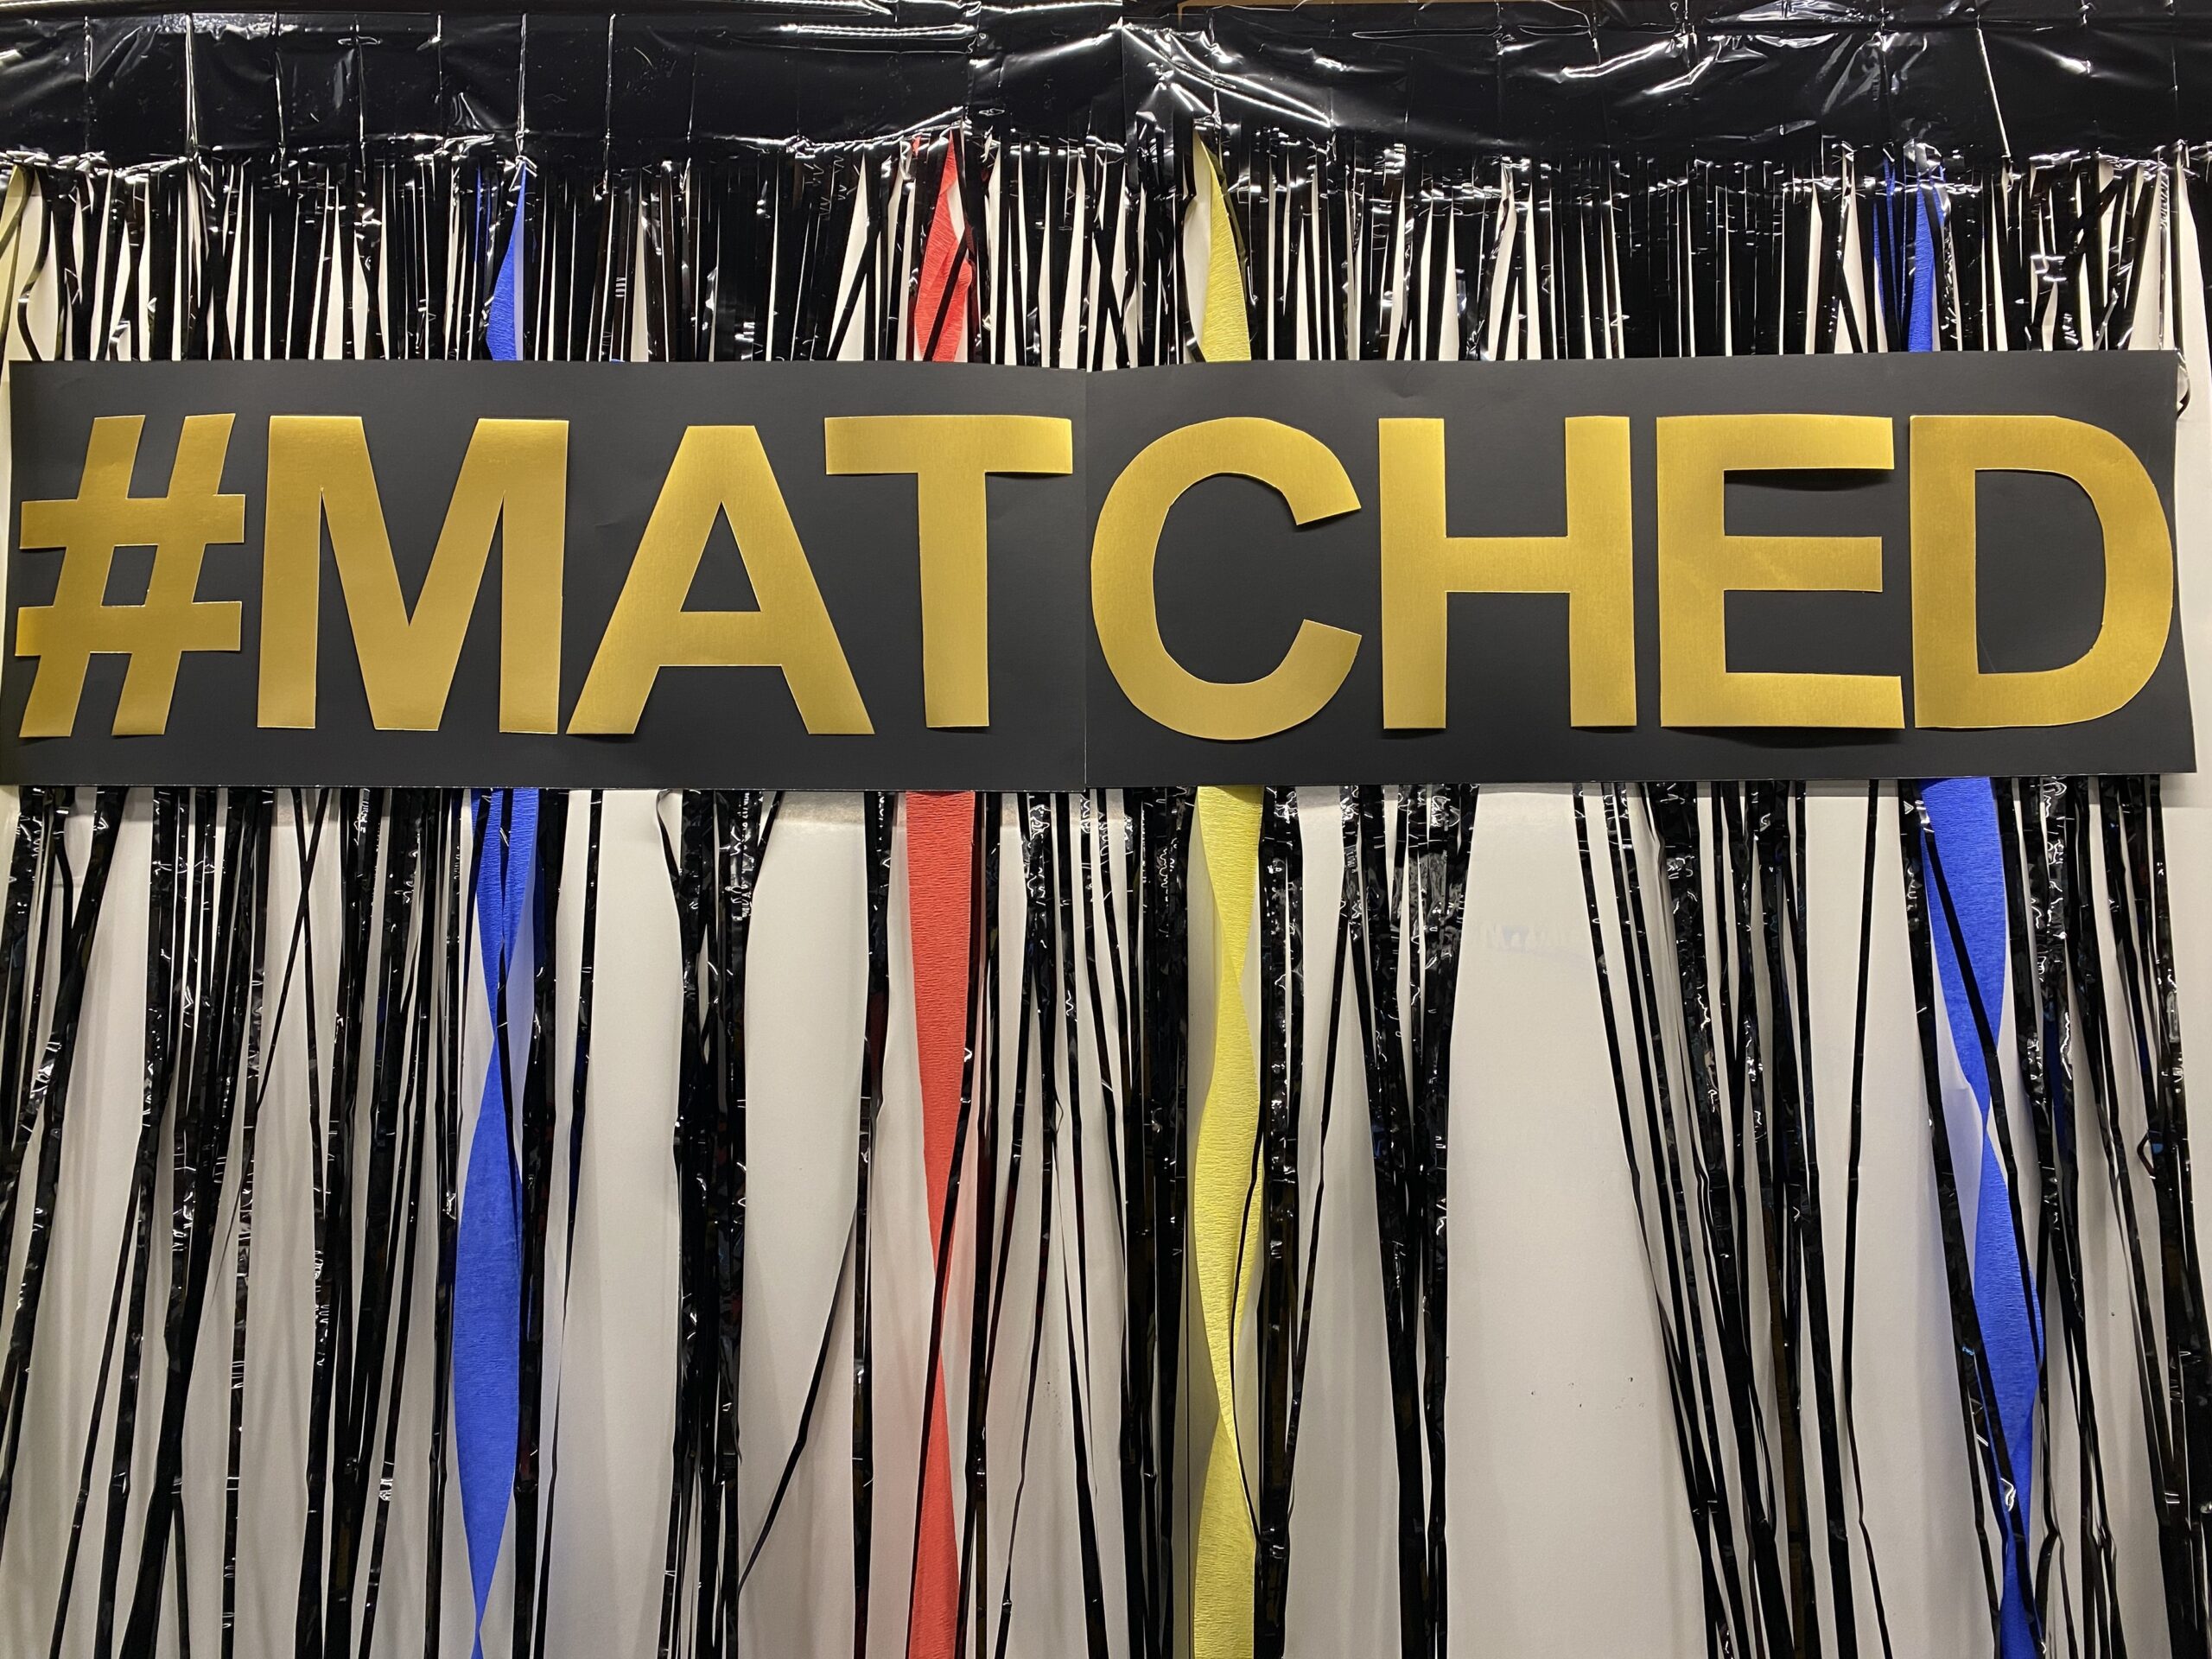 A decorative backdrop is displayed at the University of Wisconsin School of Medicine and Public Health’s 2022 Match Day event on Friday